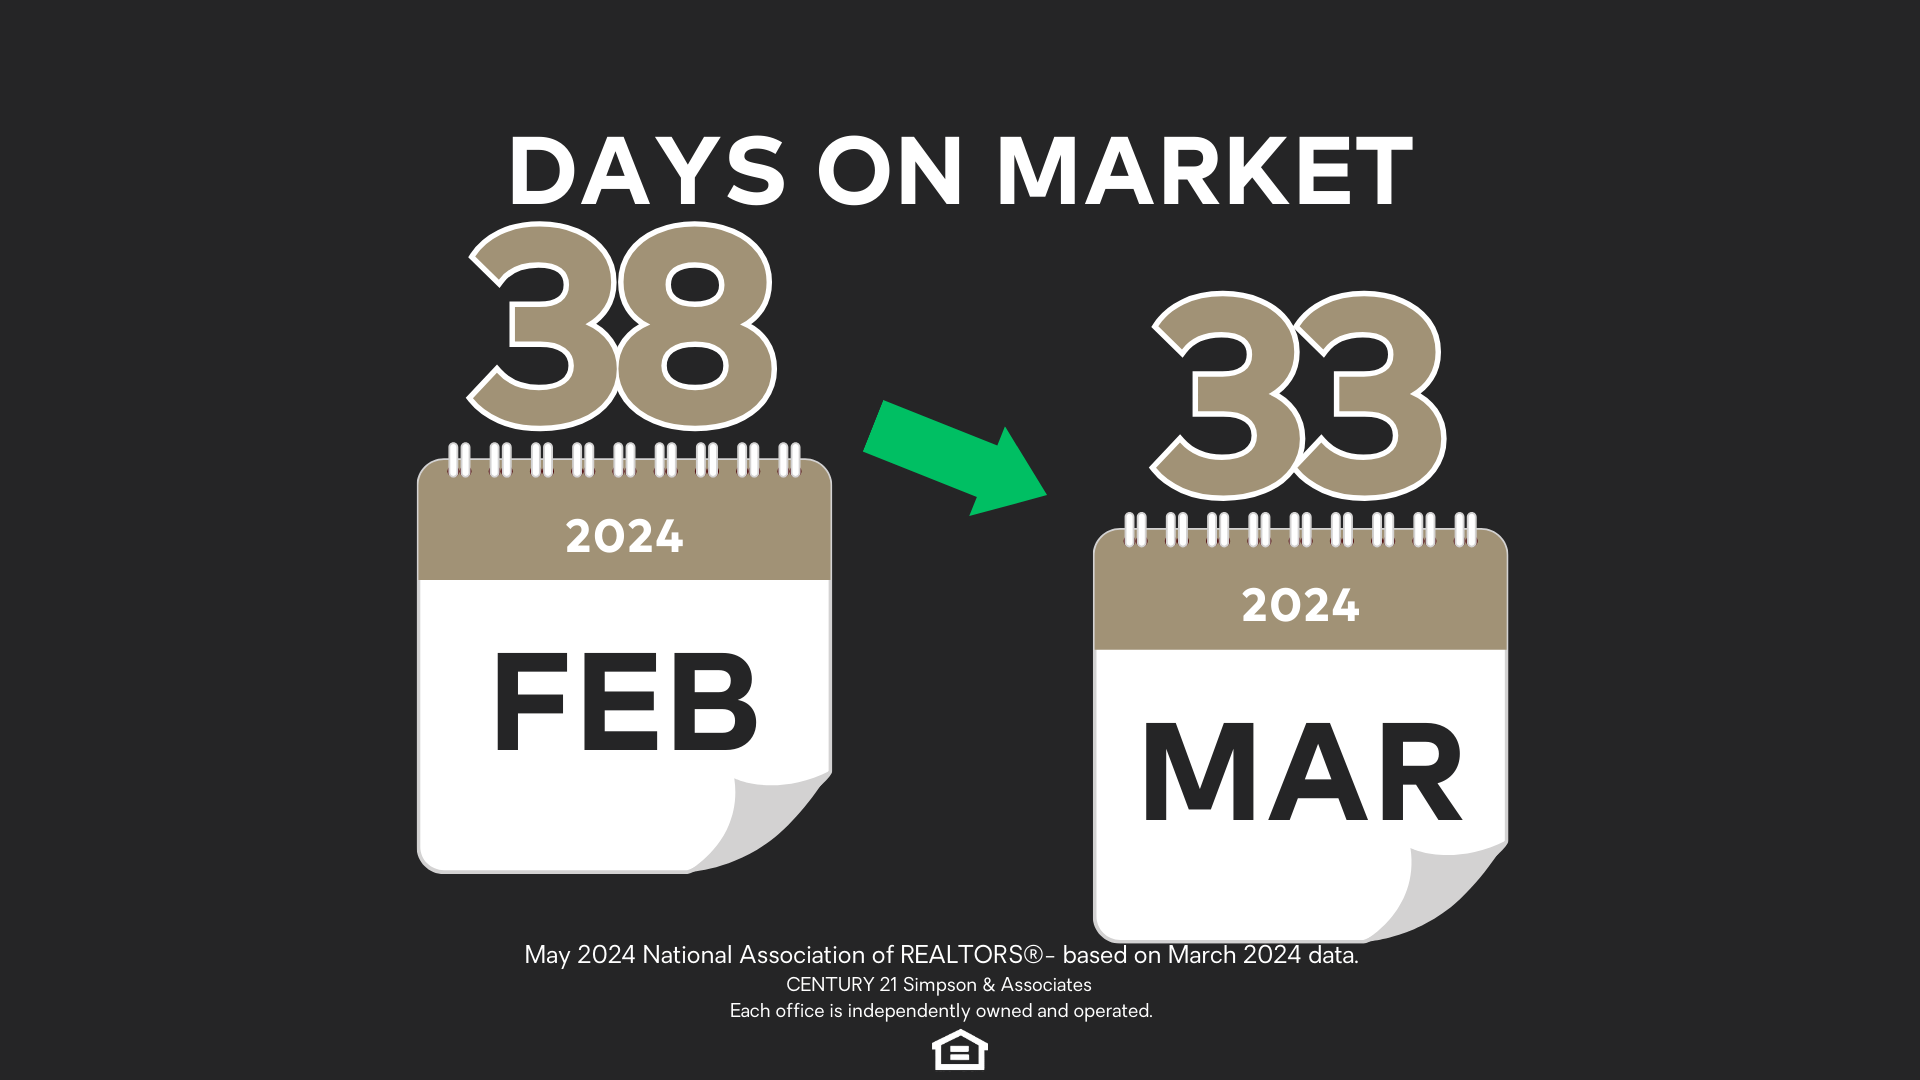 May '24 Days on Market